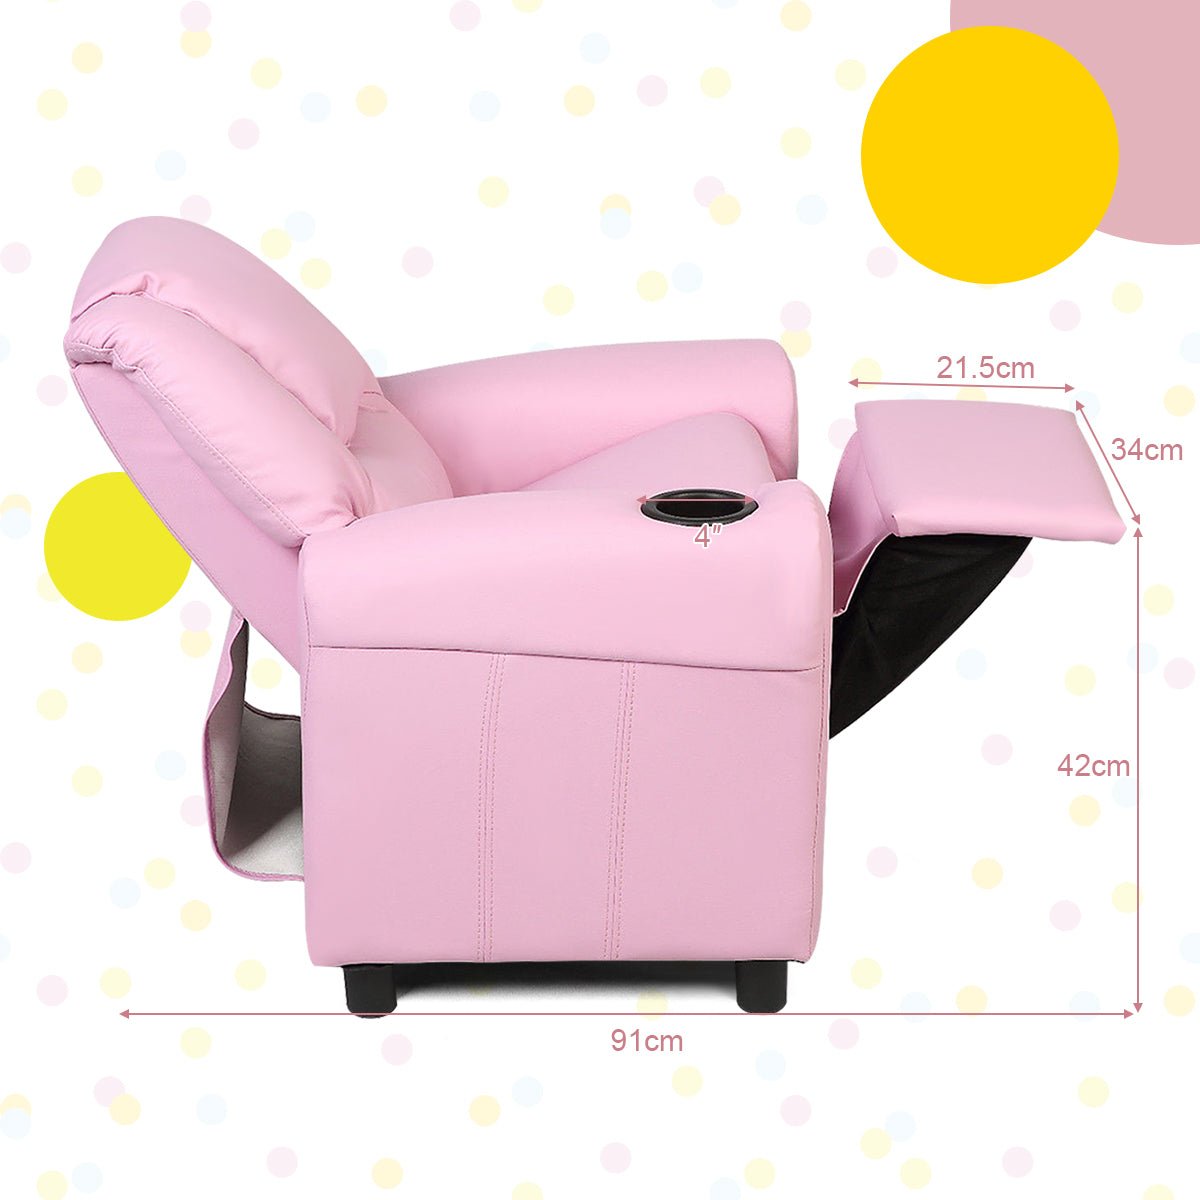 Children's Recliner Chair in Pink with Ergonomic Armrest: Relax in Style